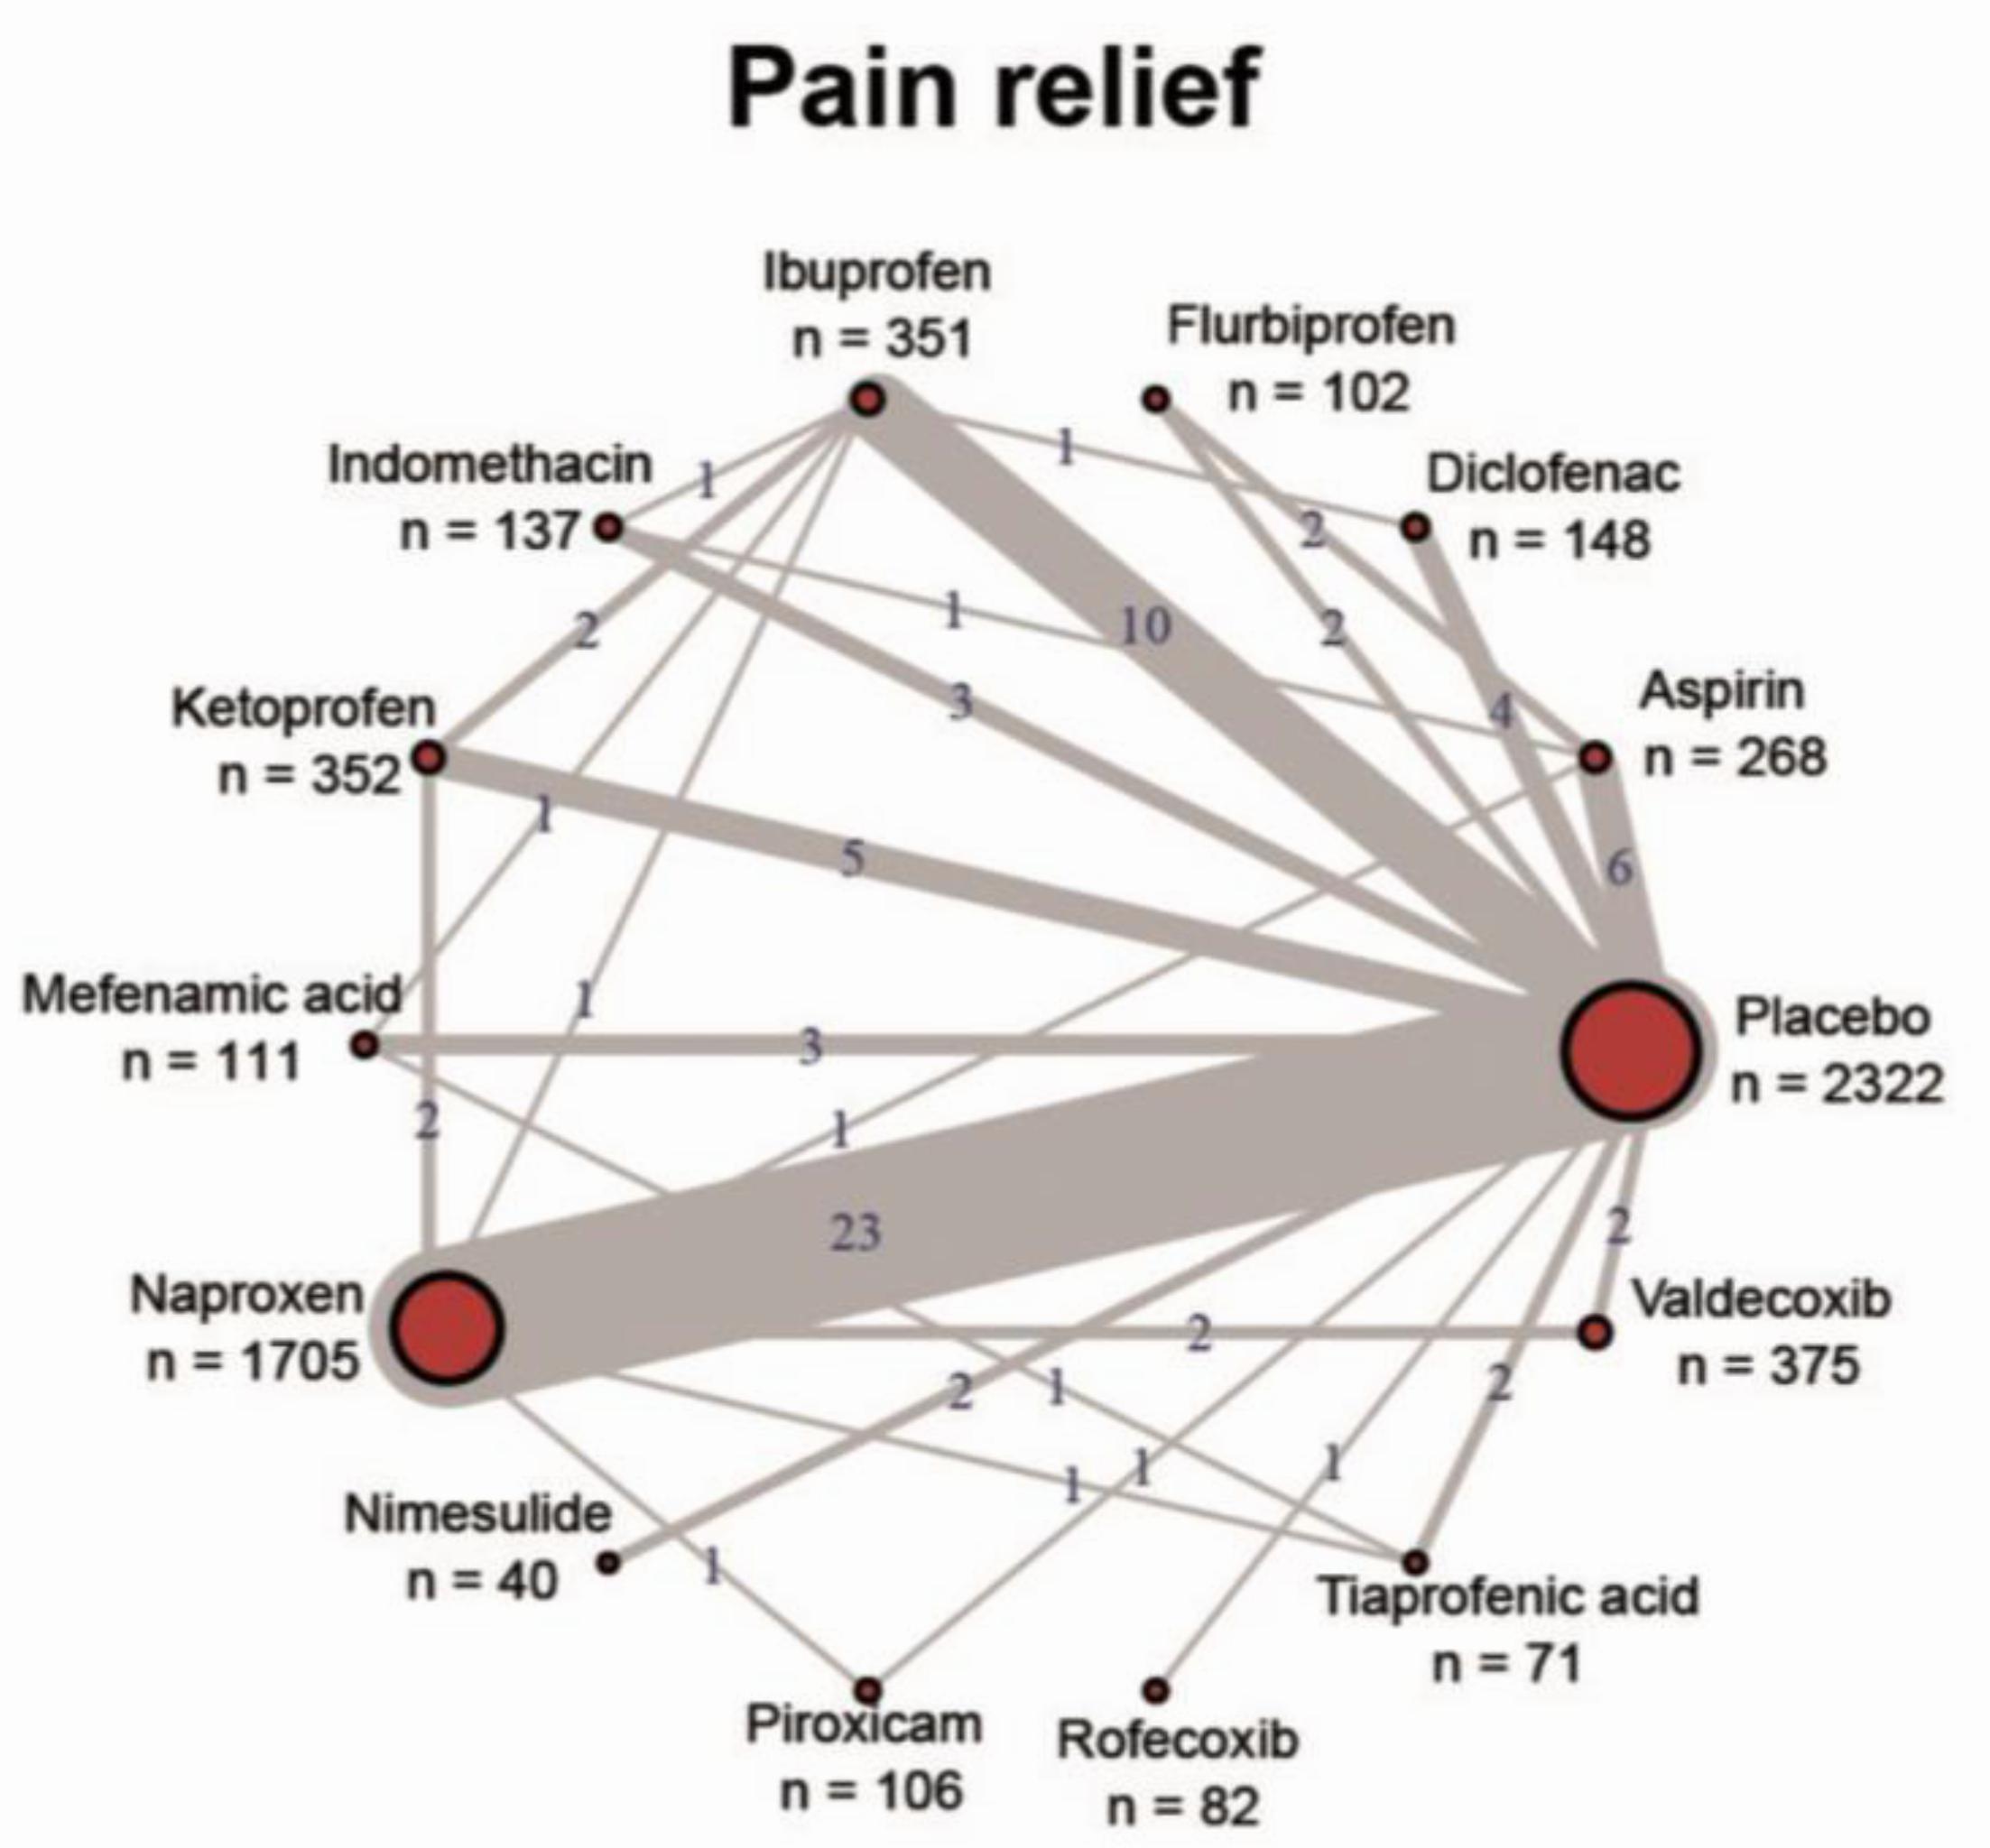 A network diagram showing the number of studies and the strength of evidence for the efficacy of various pain relief medications.